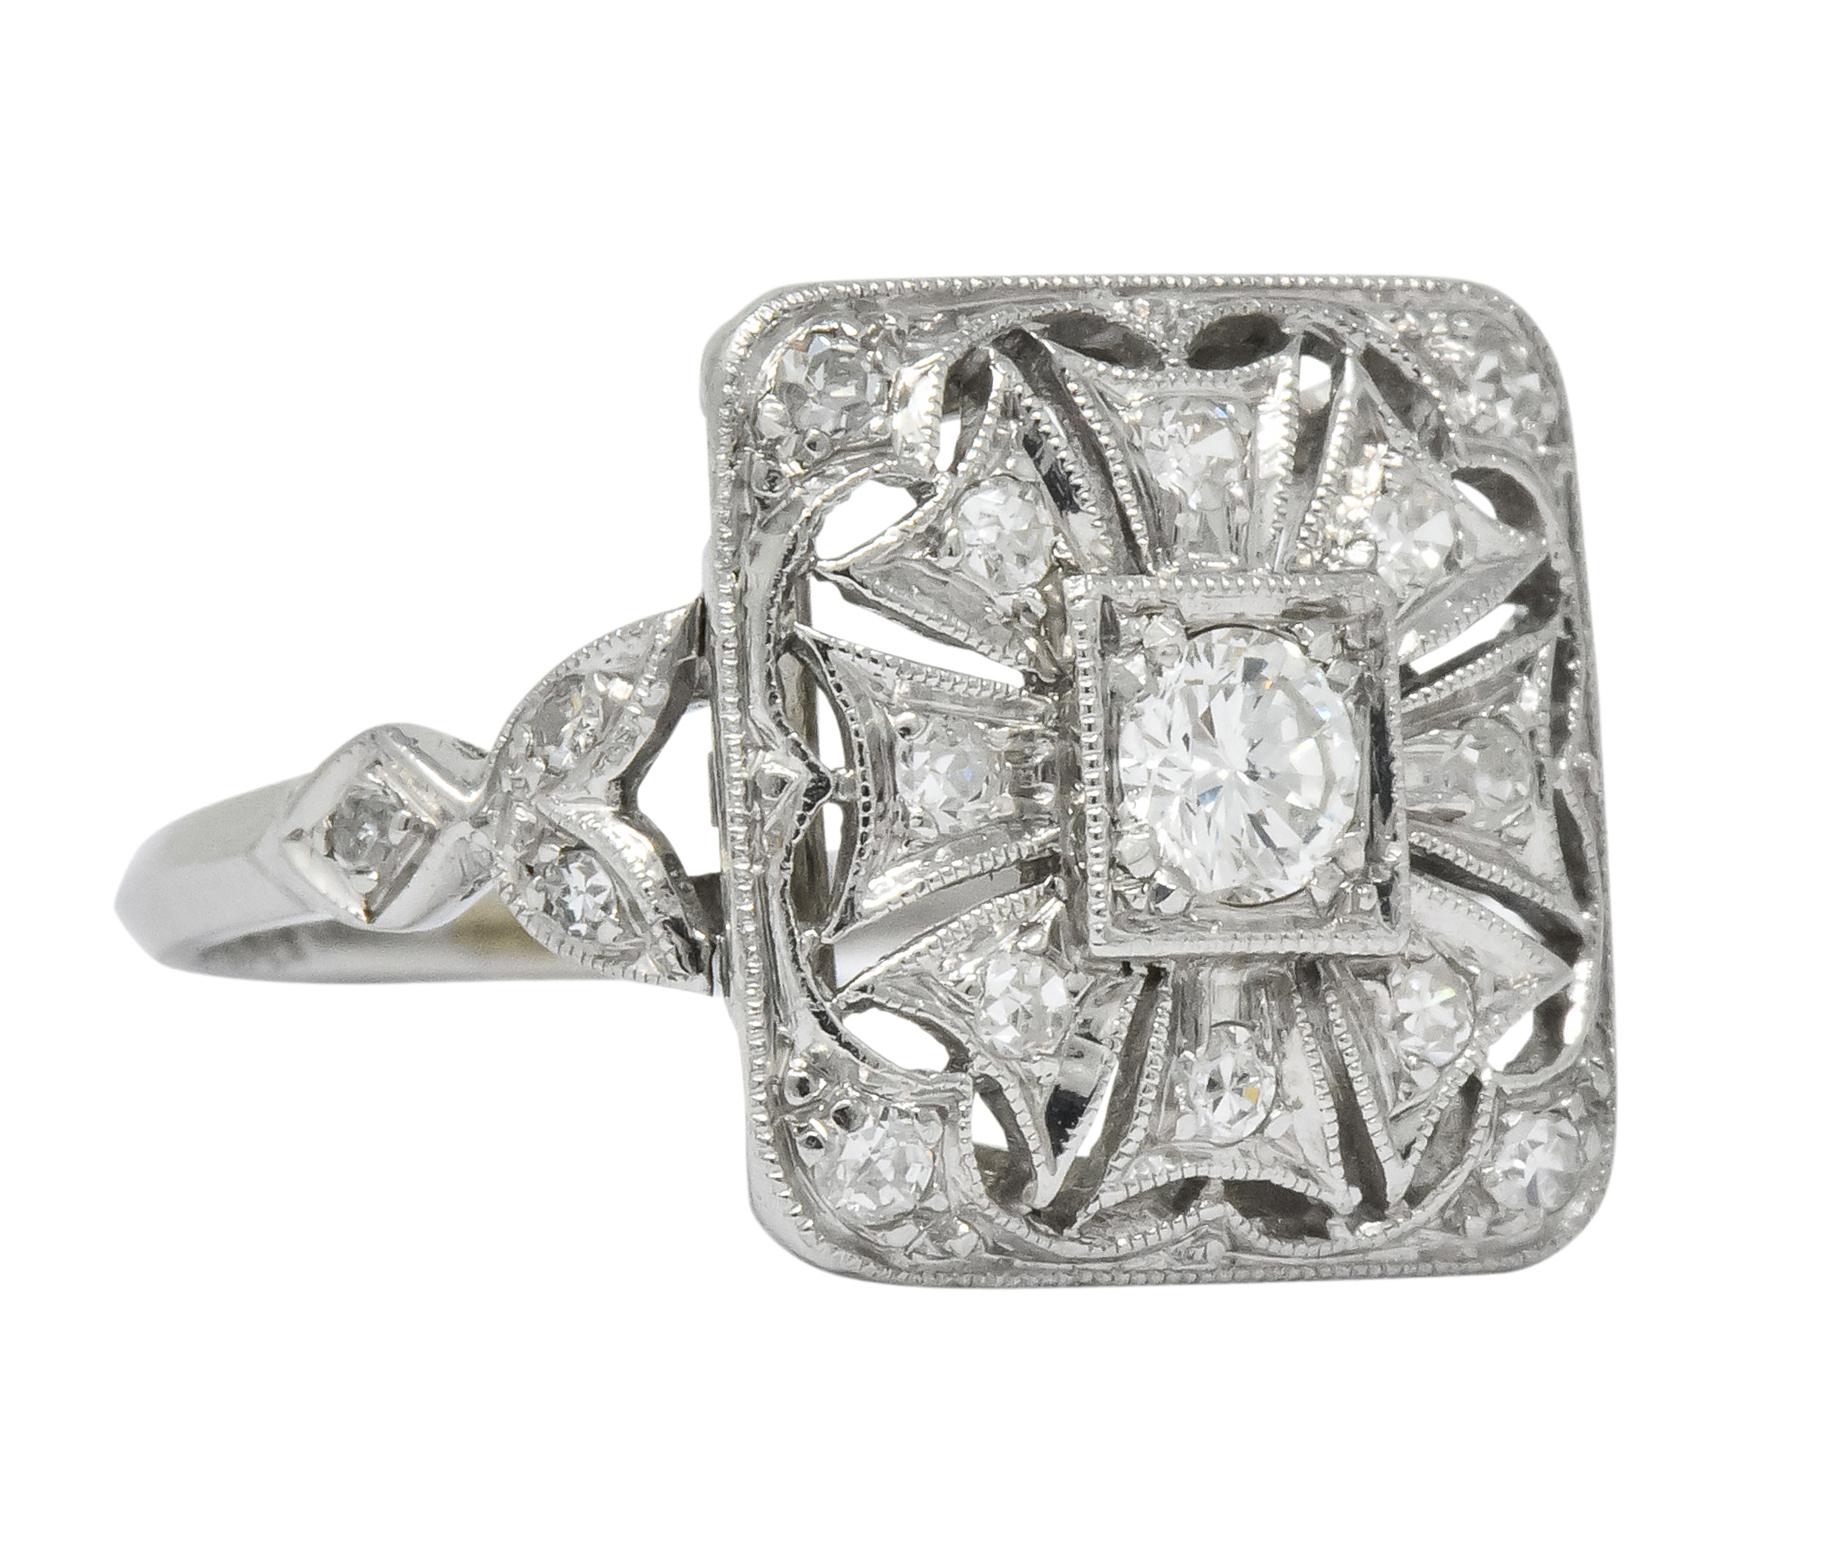 Square shaped mount with millegrain edges and pierced geometric flower motif

Centering a bead set round brilliant cut diamond weighing approximately 0.12 carat, I color and SI1 clarity

Surrounded by bead set single cut diamonds weighing